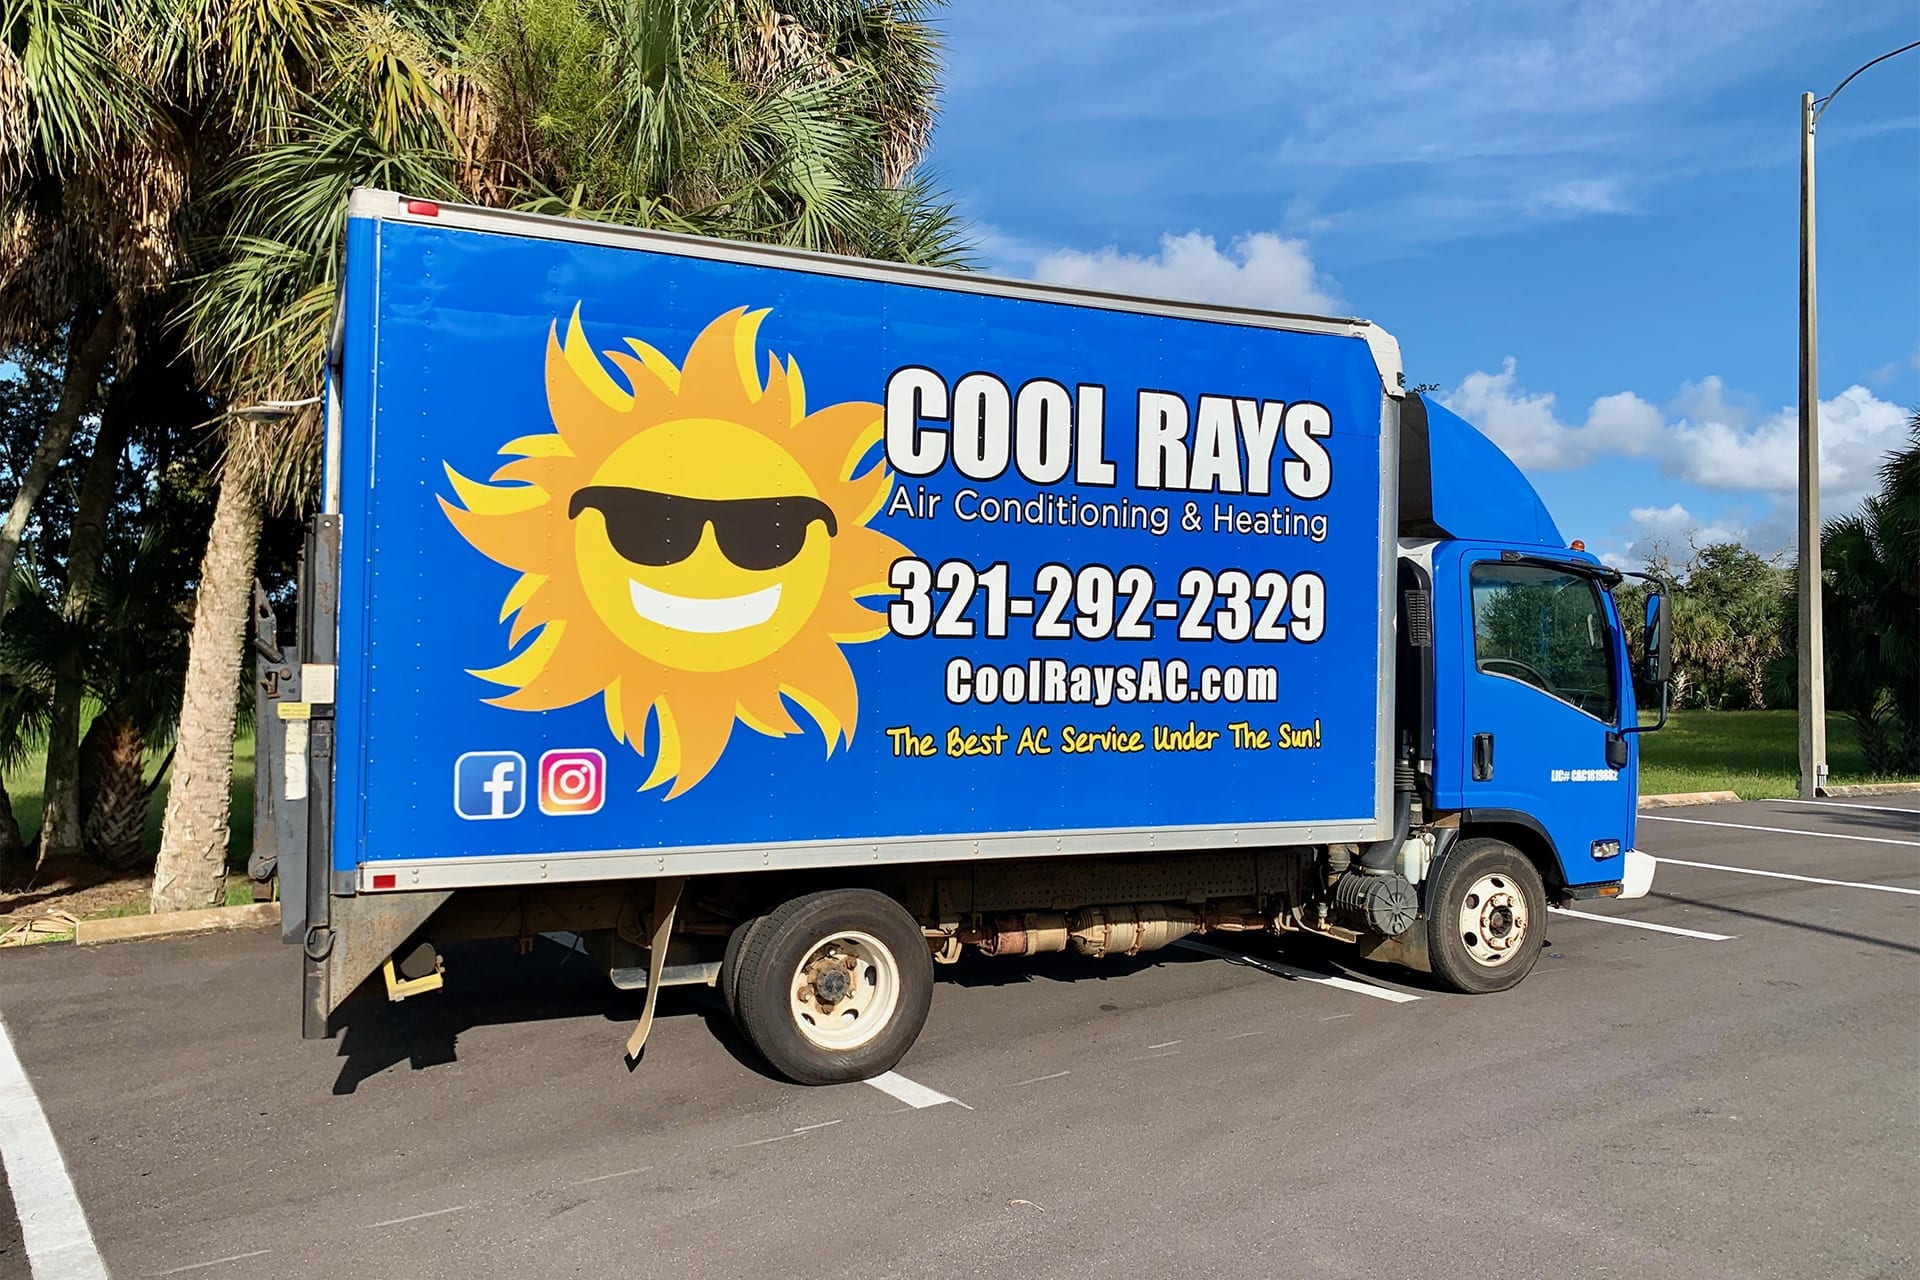 cool rays air conditioning and heating truck